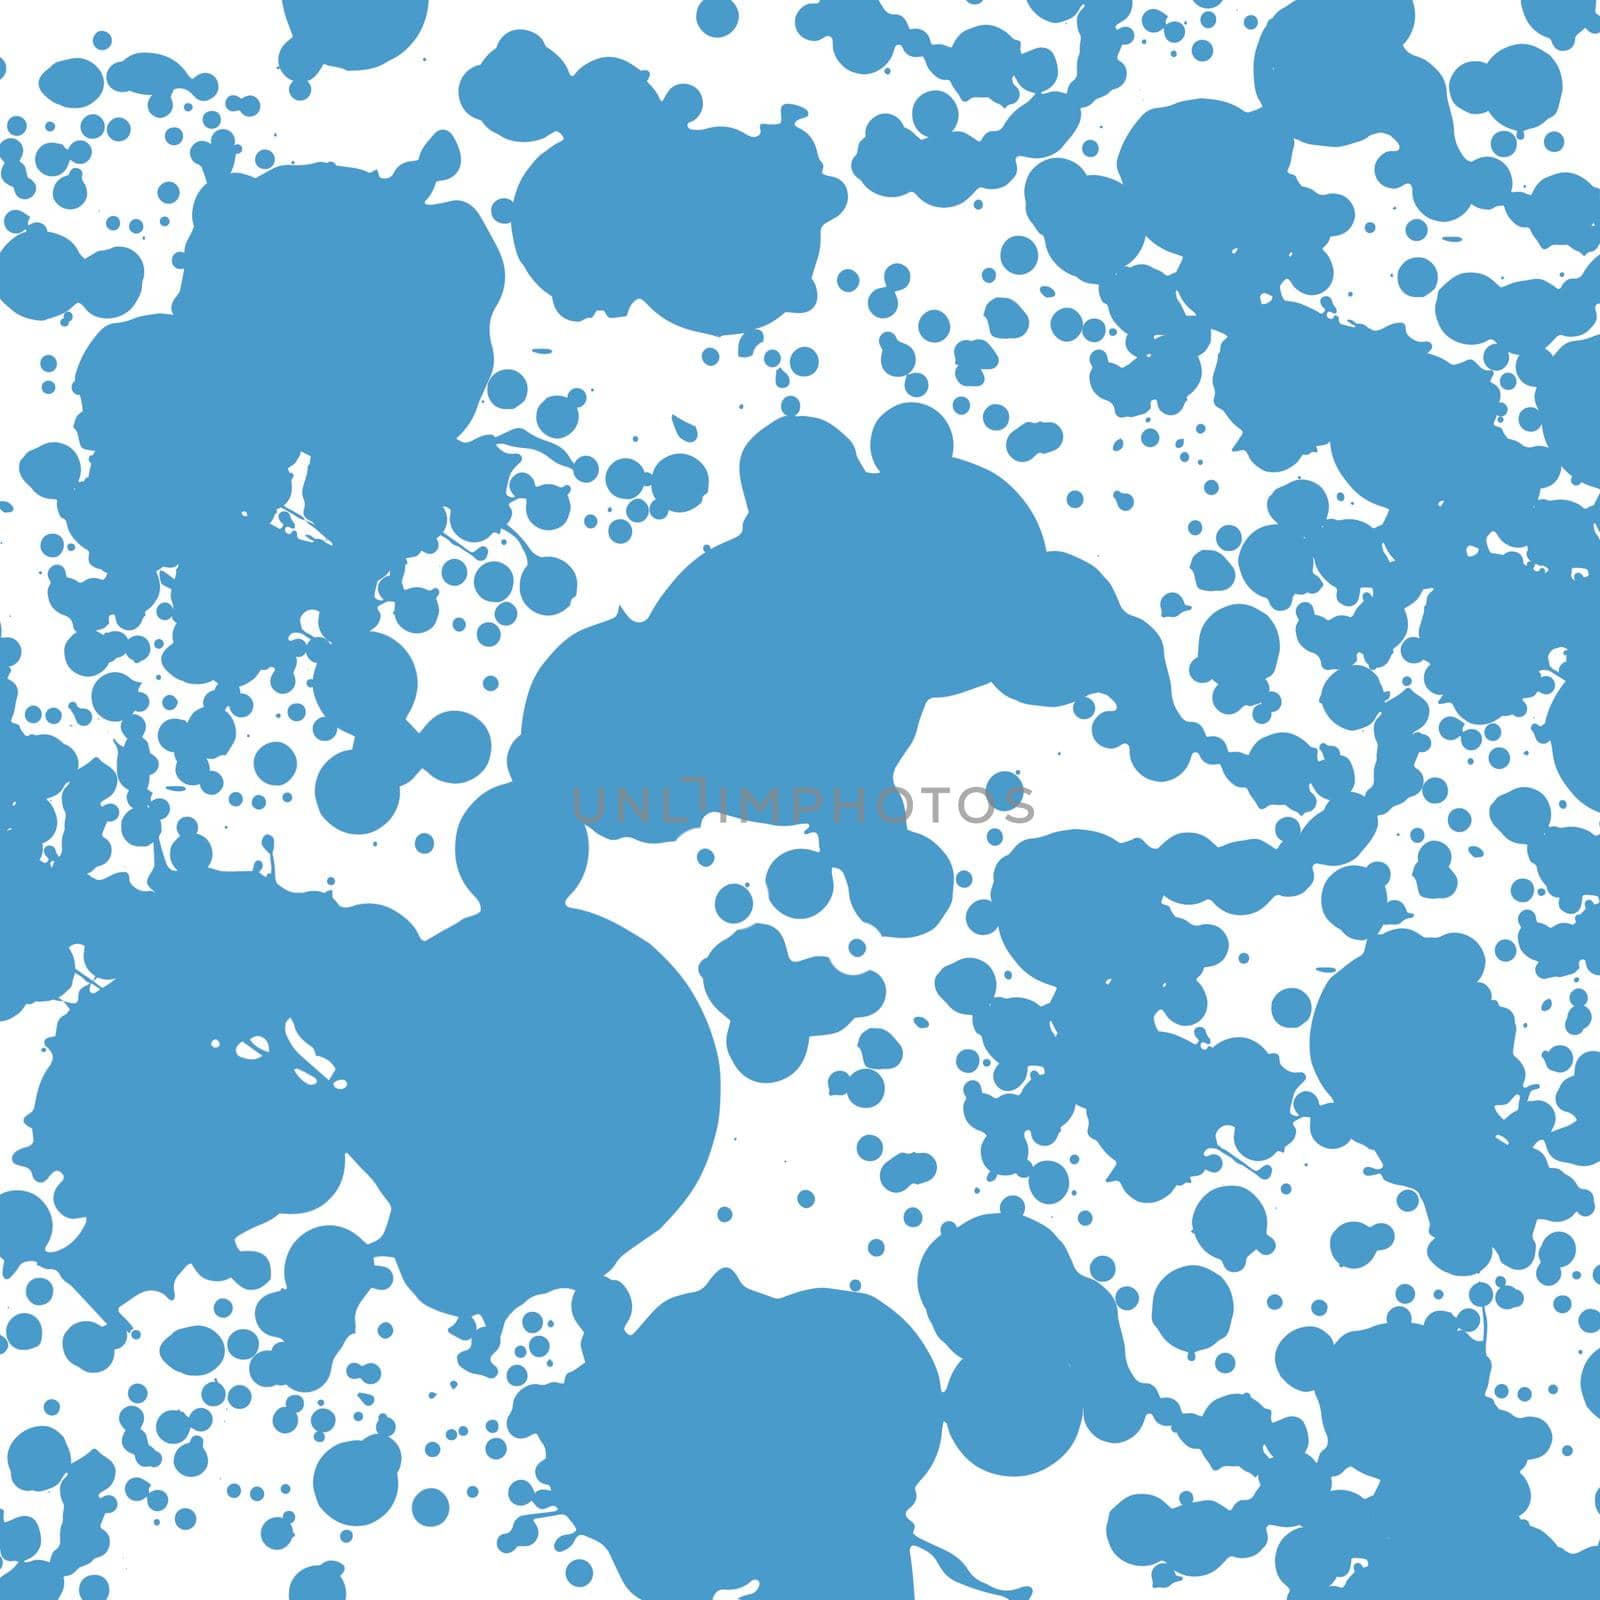 Abstract background large blue spots of different shapes on a white background